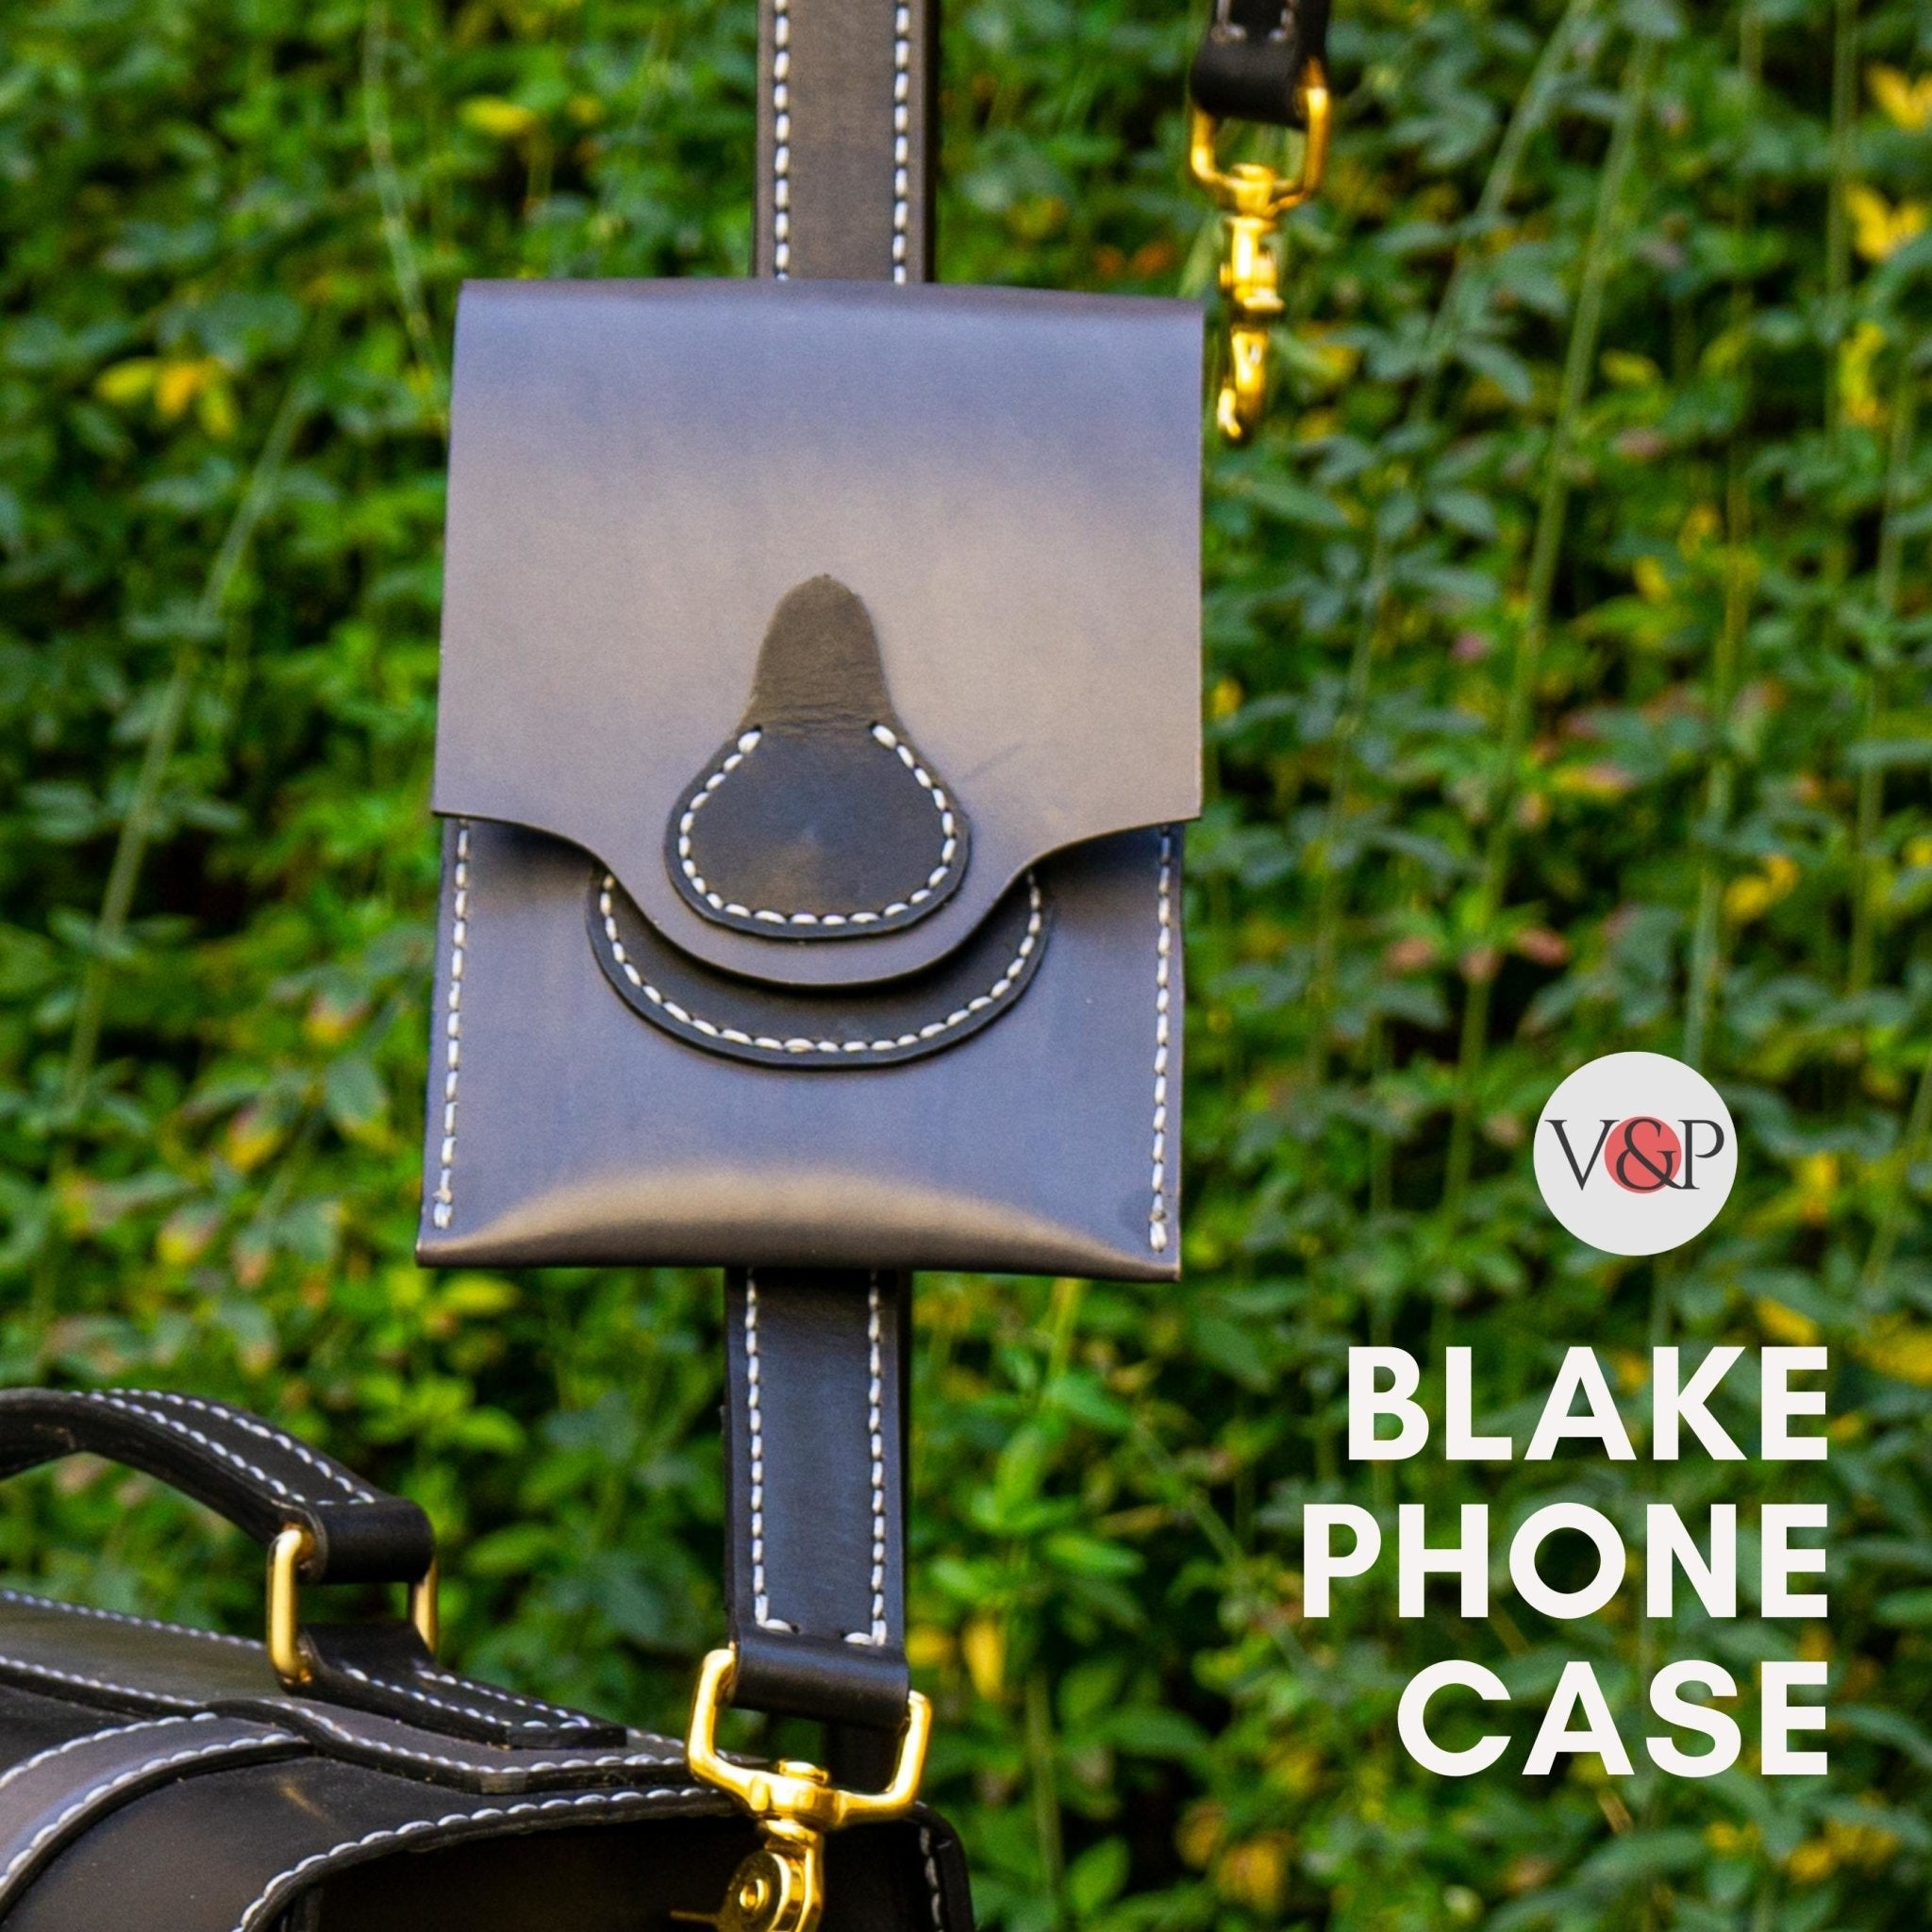 Blake Phone Case, PDF Pattern And Instructional Video by Vasile and Pavel - Vasile and Pavel Leather Patterns